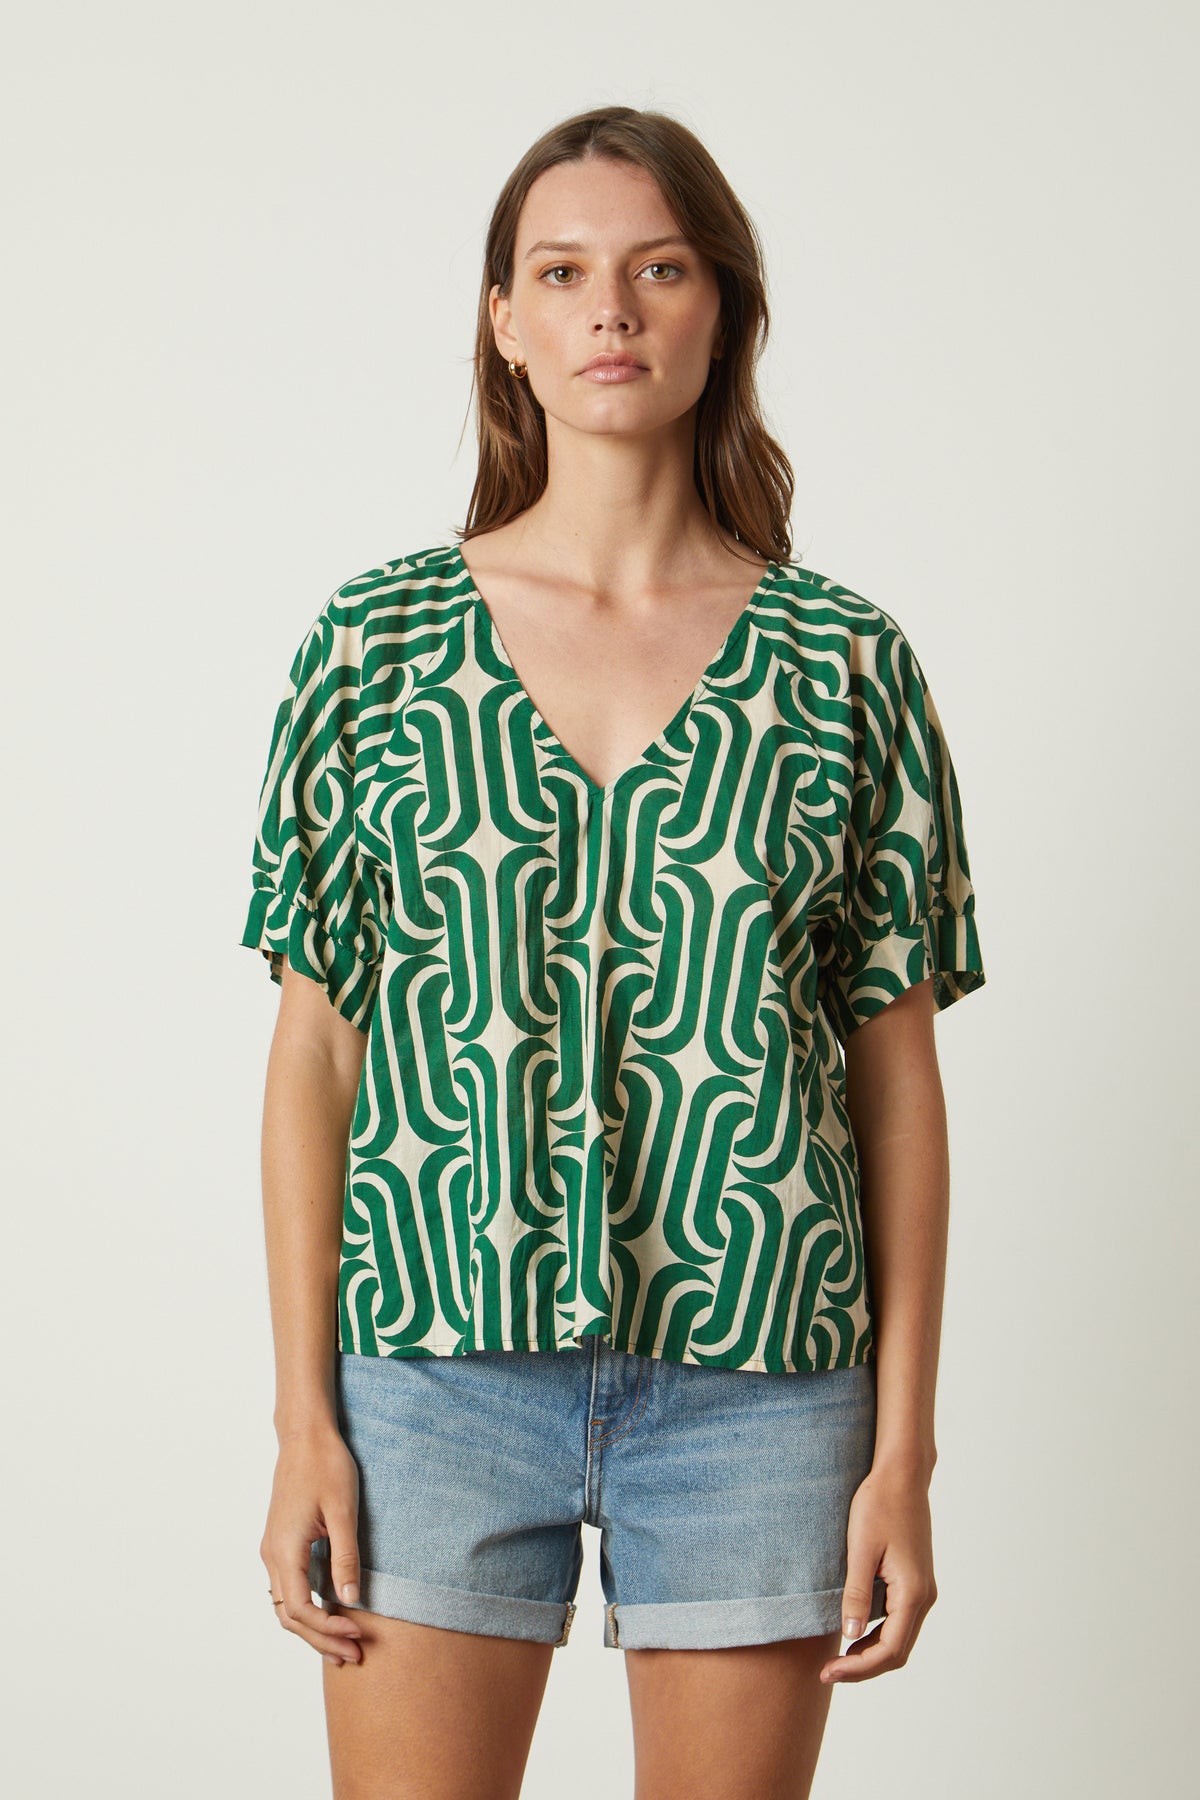 a woman wearing shorts and a Velvet by Graham & Spencer JODY PRINTED TOP.-26312405450945